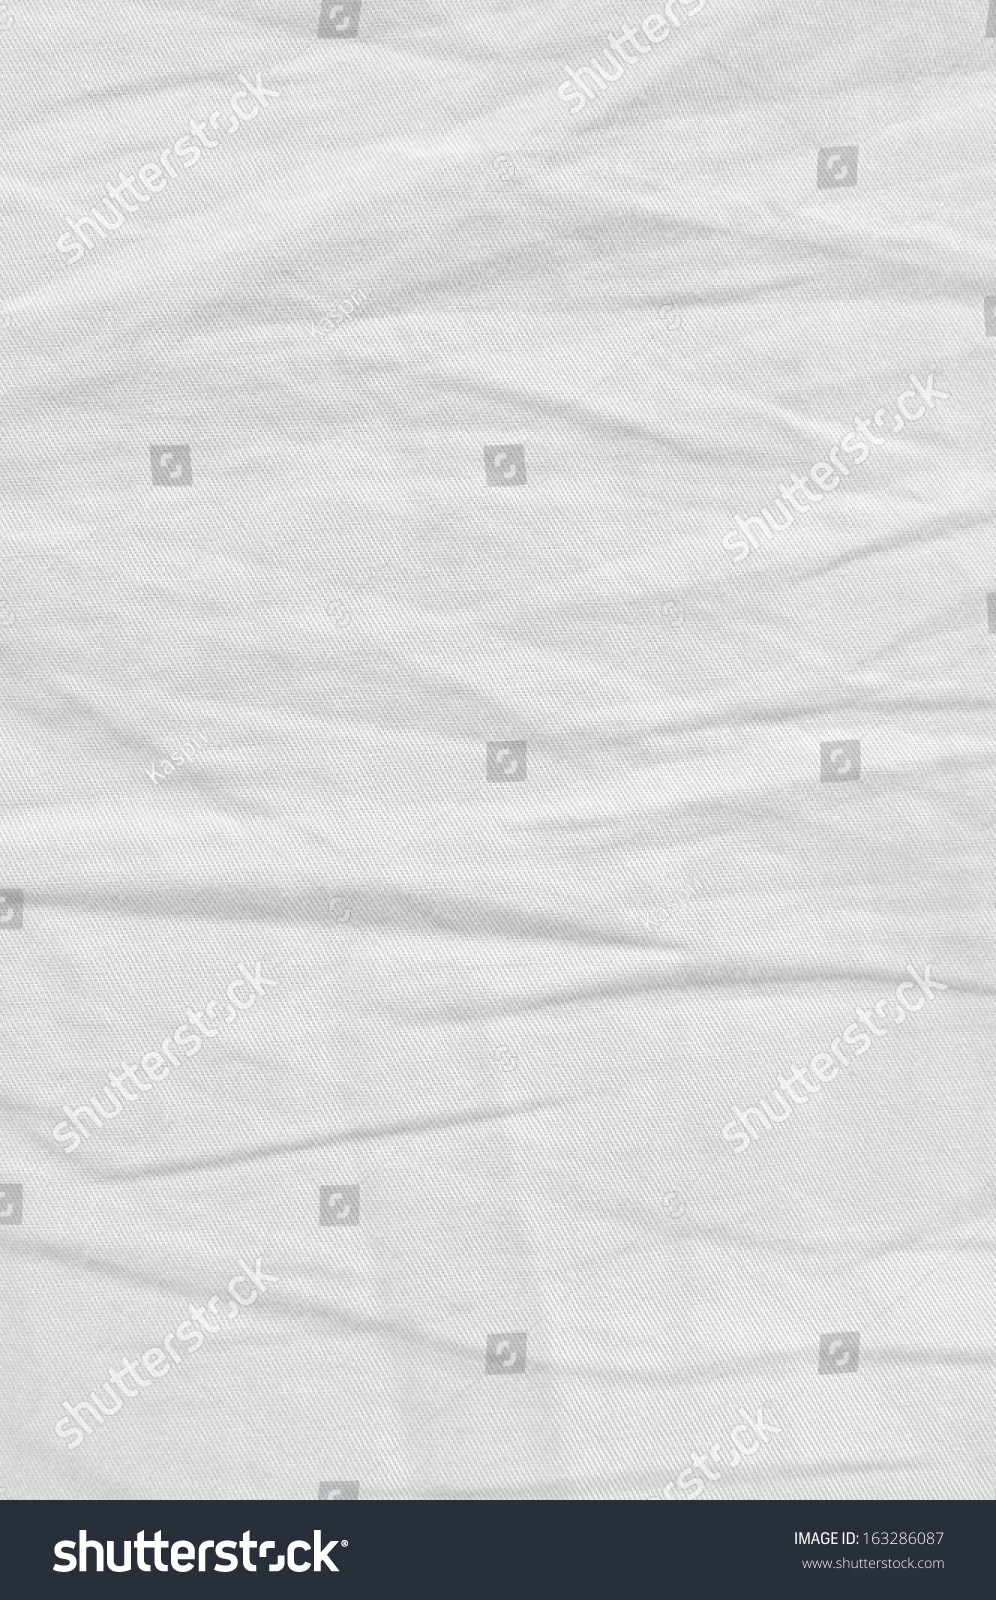 White Natural Light Linen Plus Cotton Chinos Texture, Detailed Closeup, rustic crumpled vintage textured fabric burlap diagonal twill jeans canvas pattern, vertical copy space background #163286087